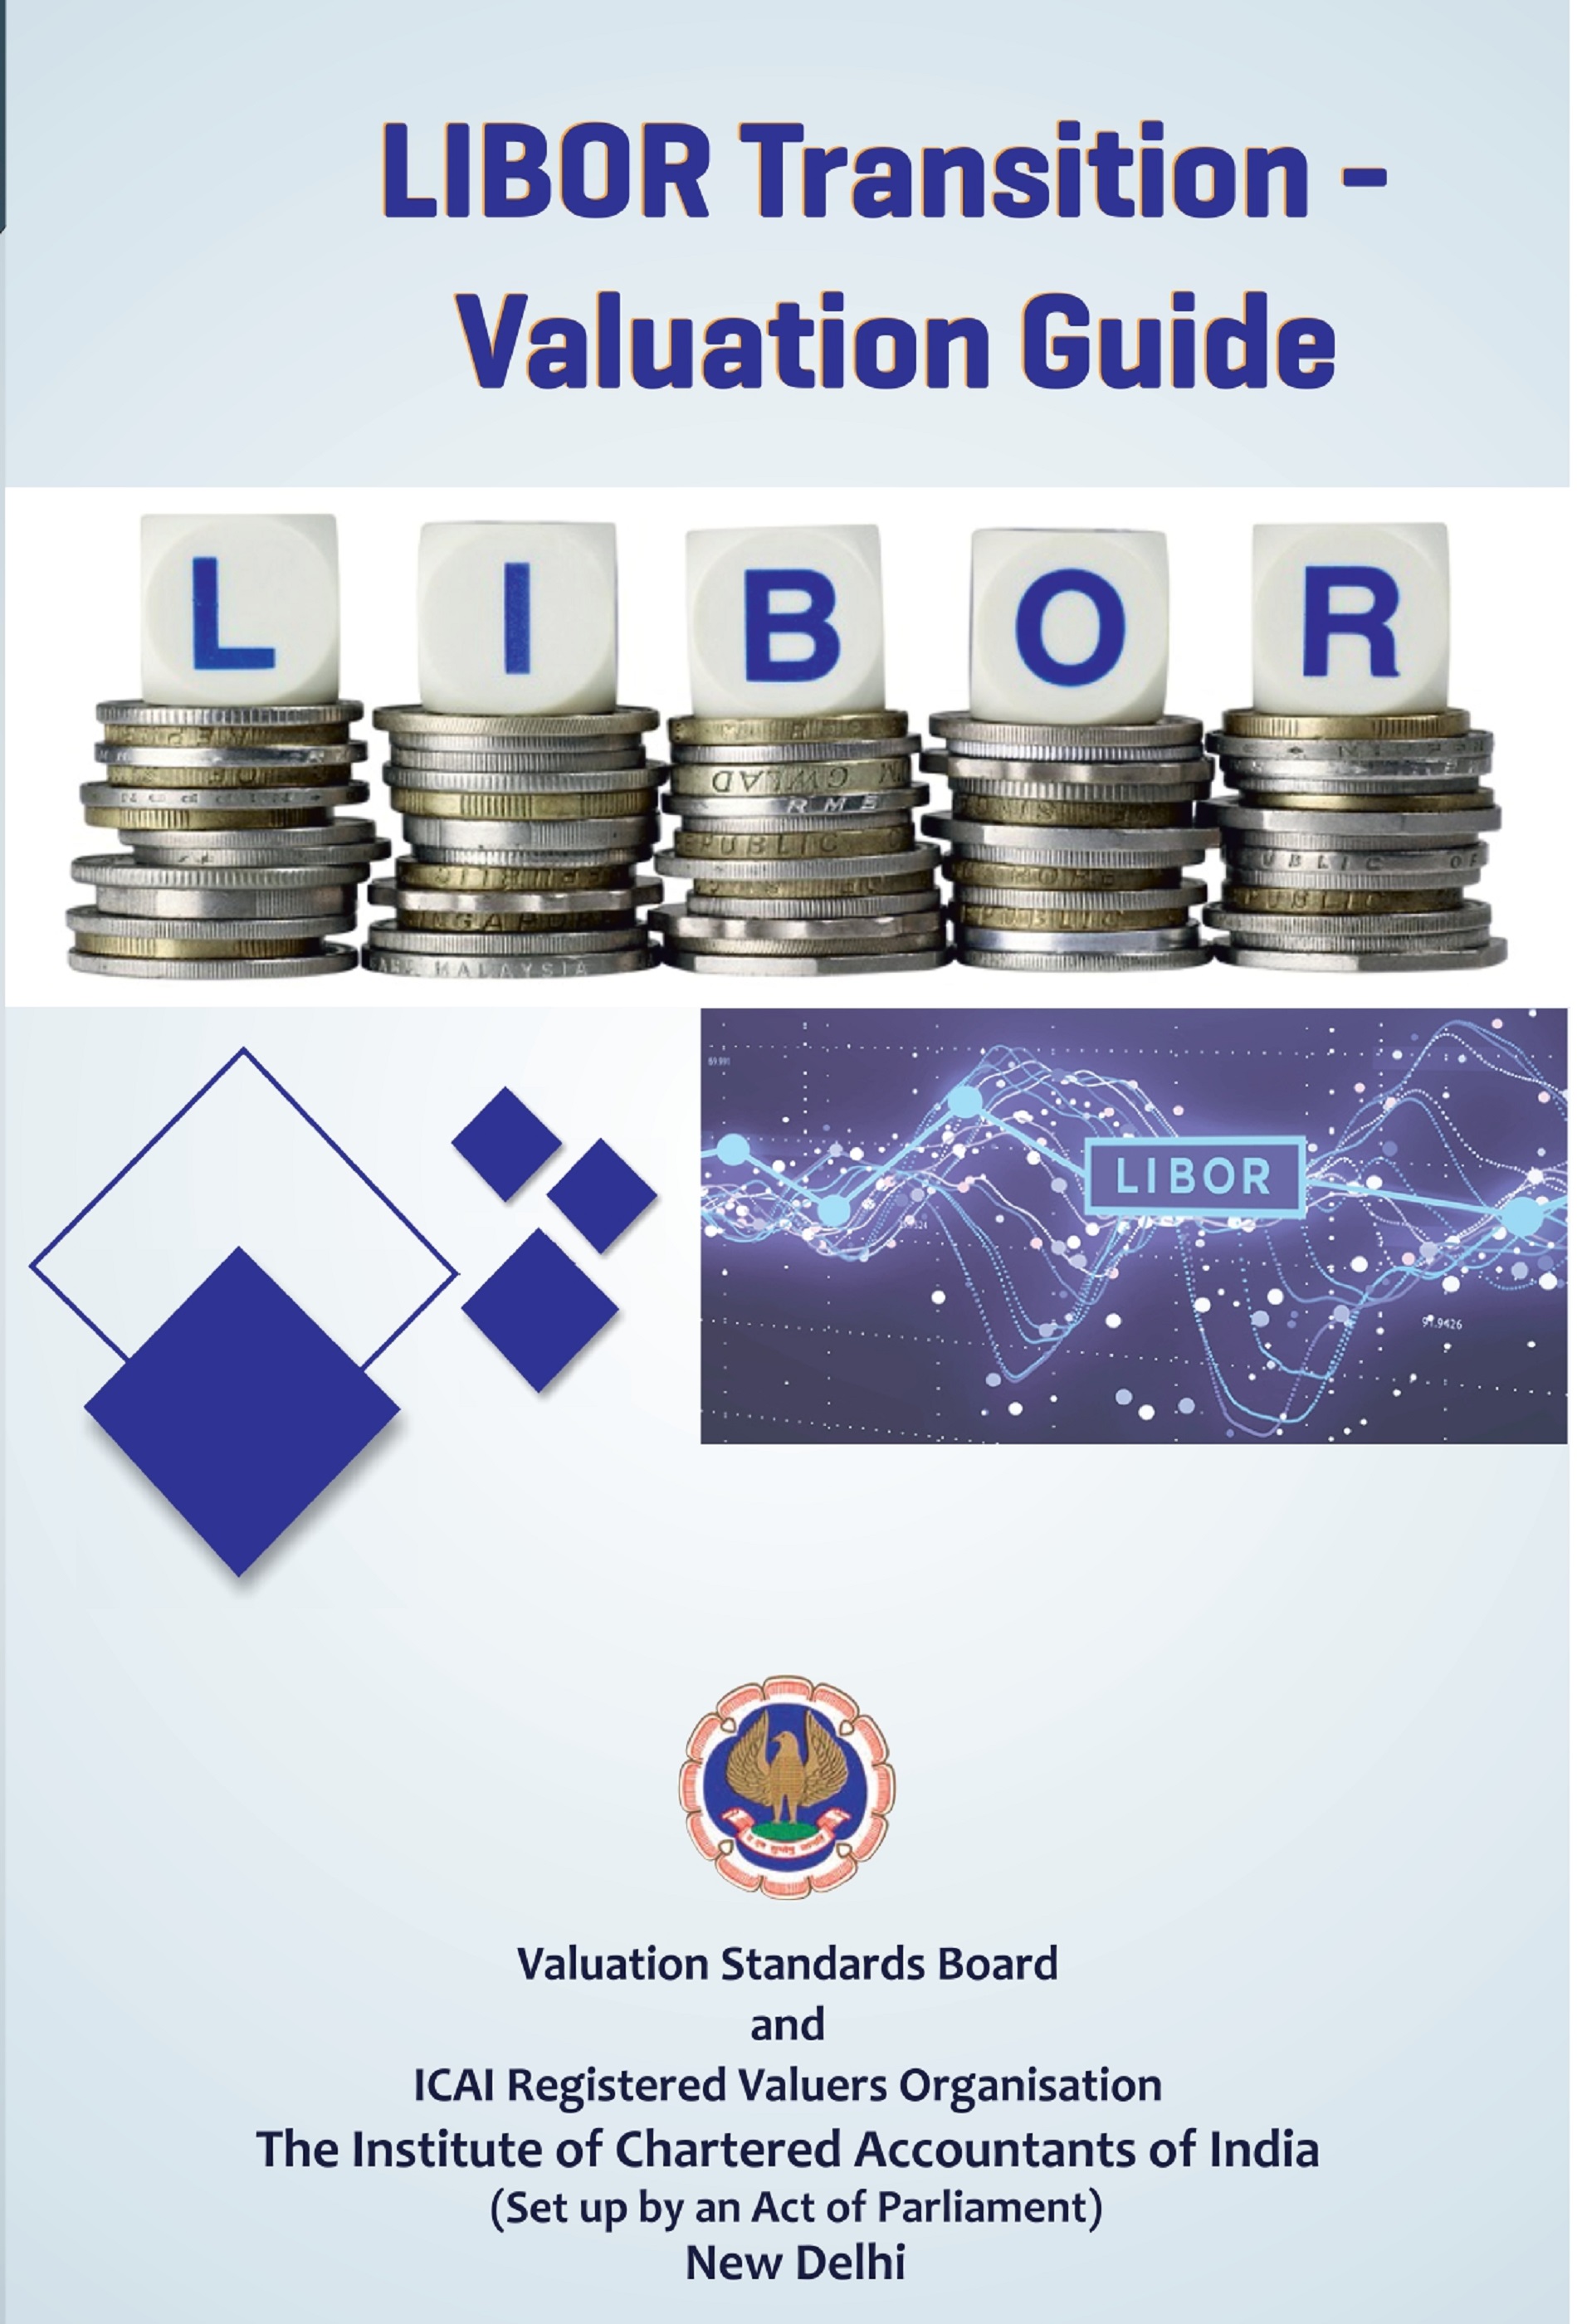 LIBOR Transition - Valuation Guide (February, 2022)